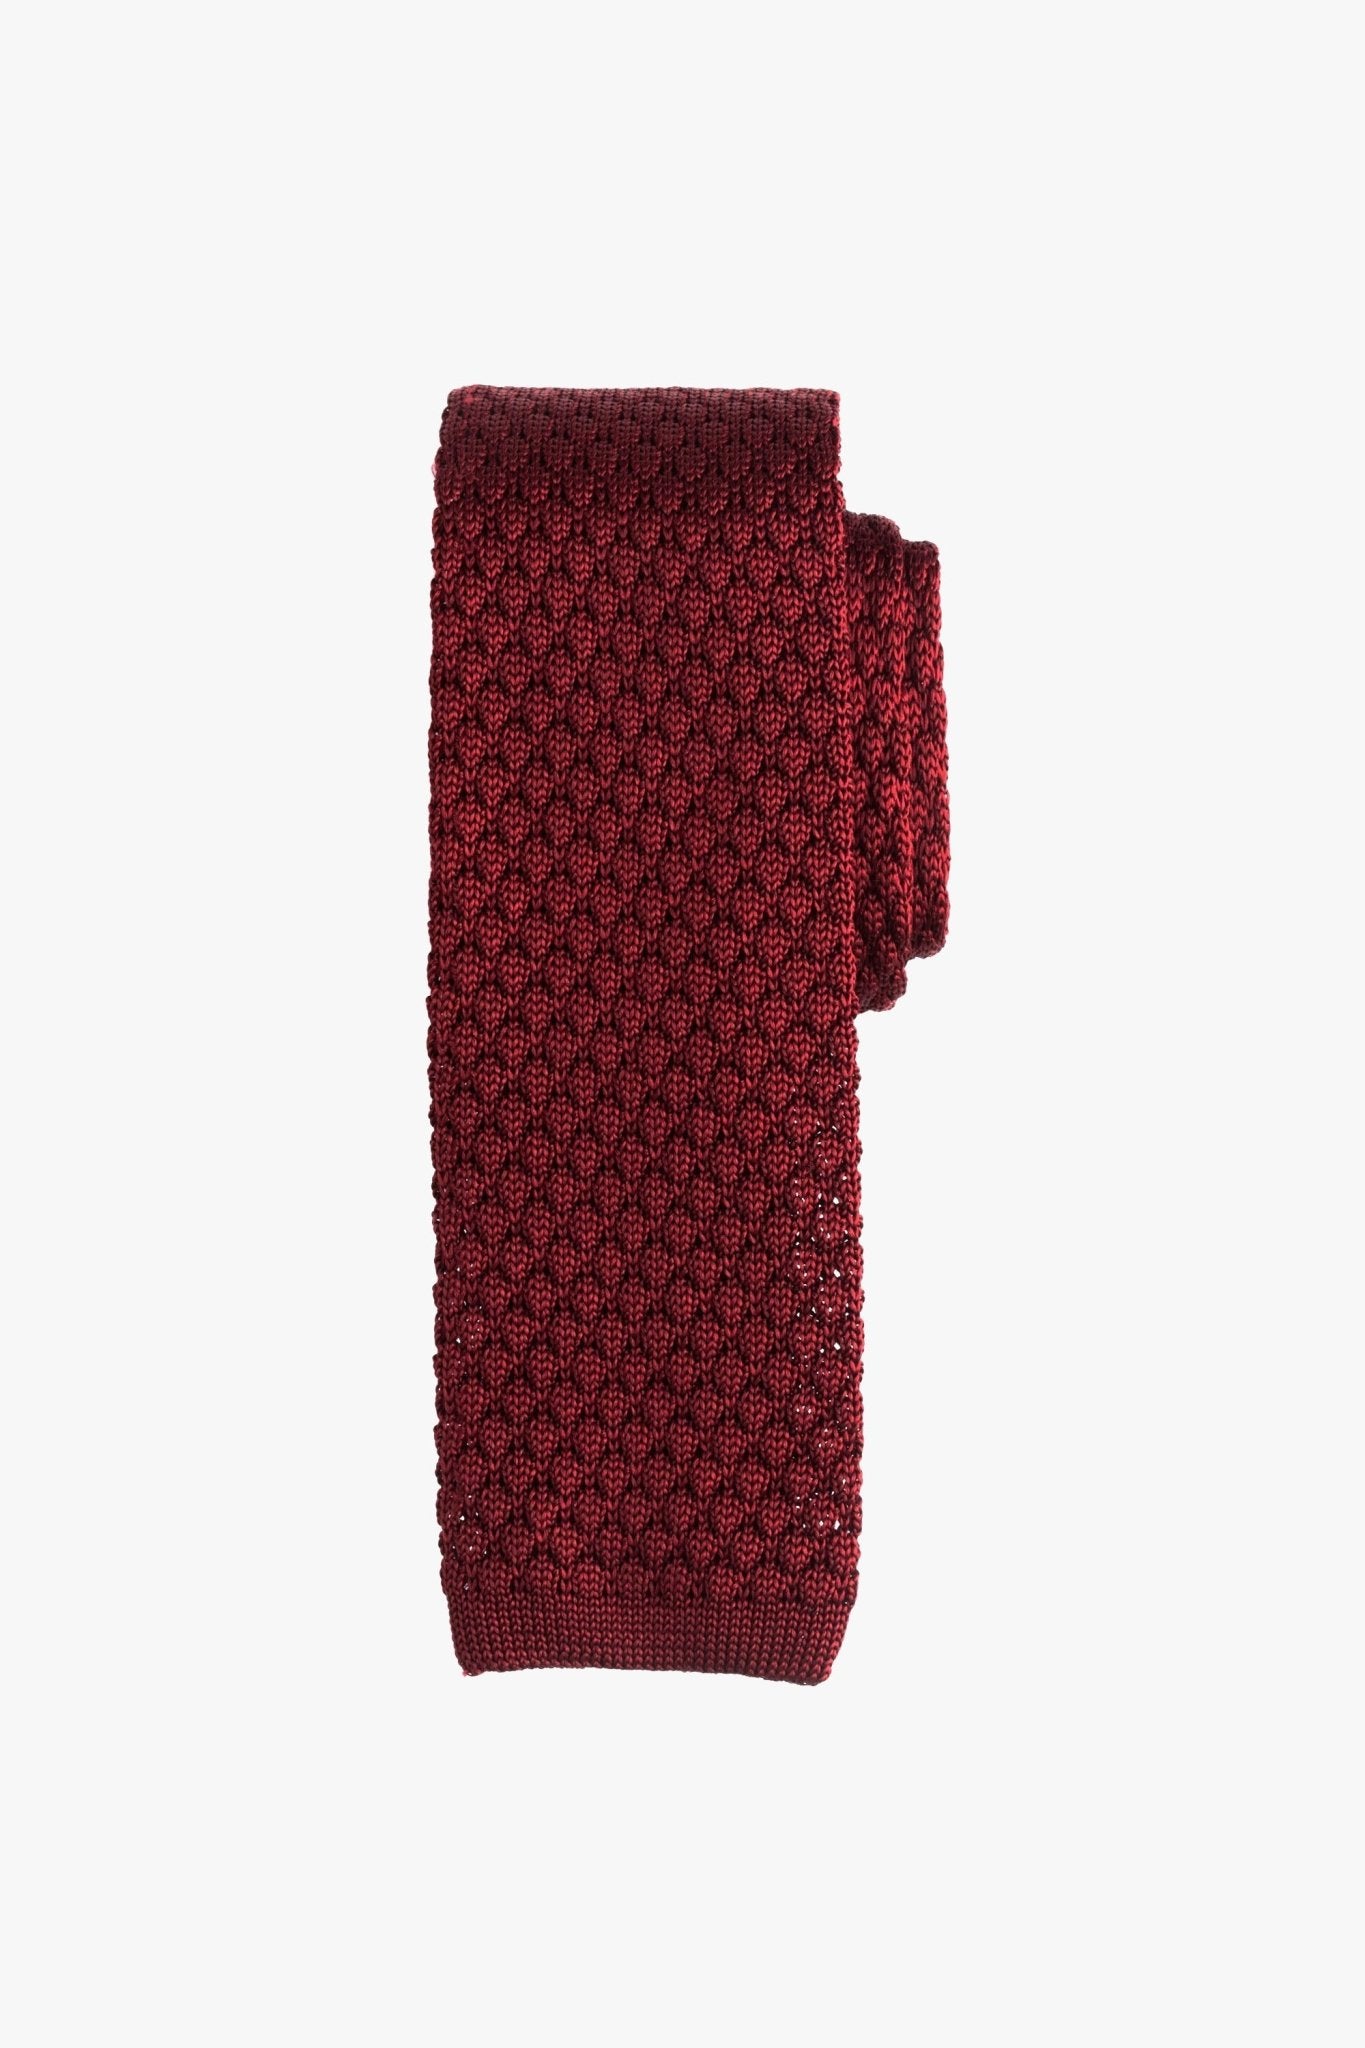 Red Knitted Tie - My Suited Life